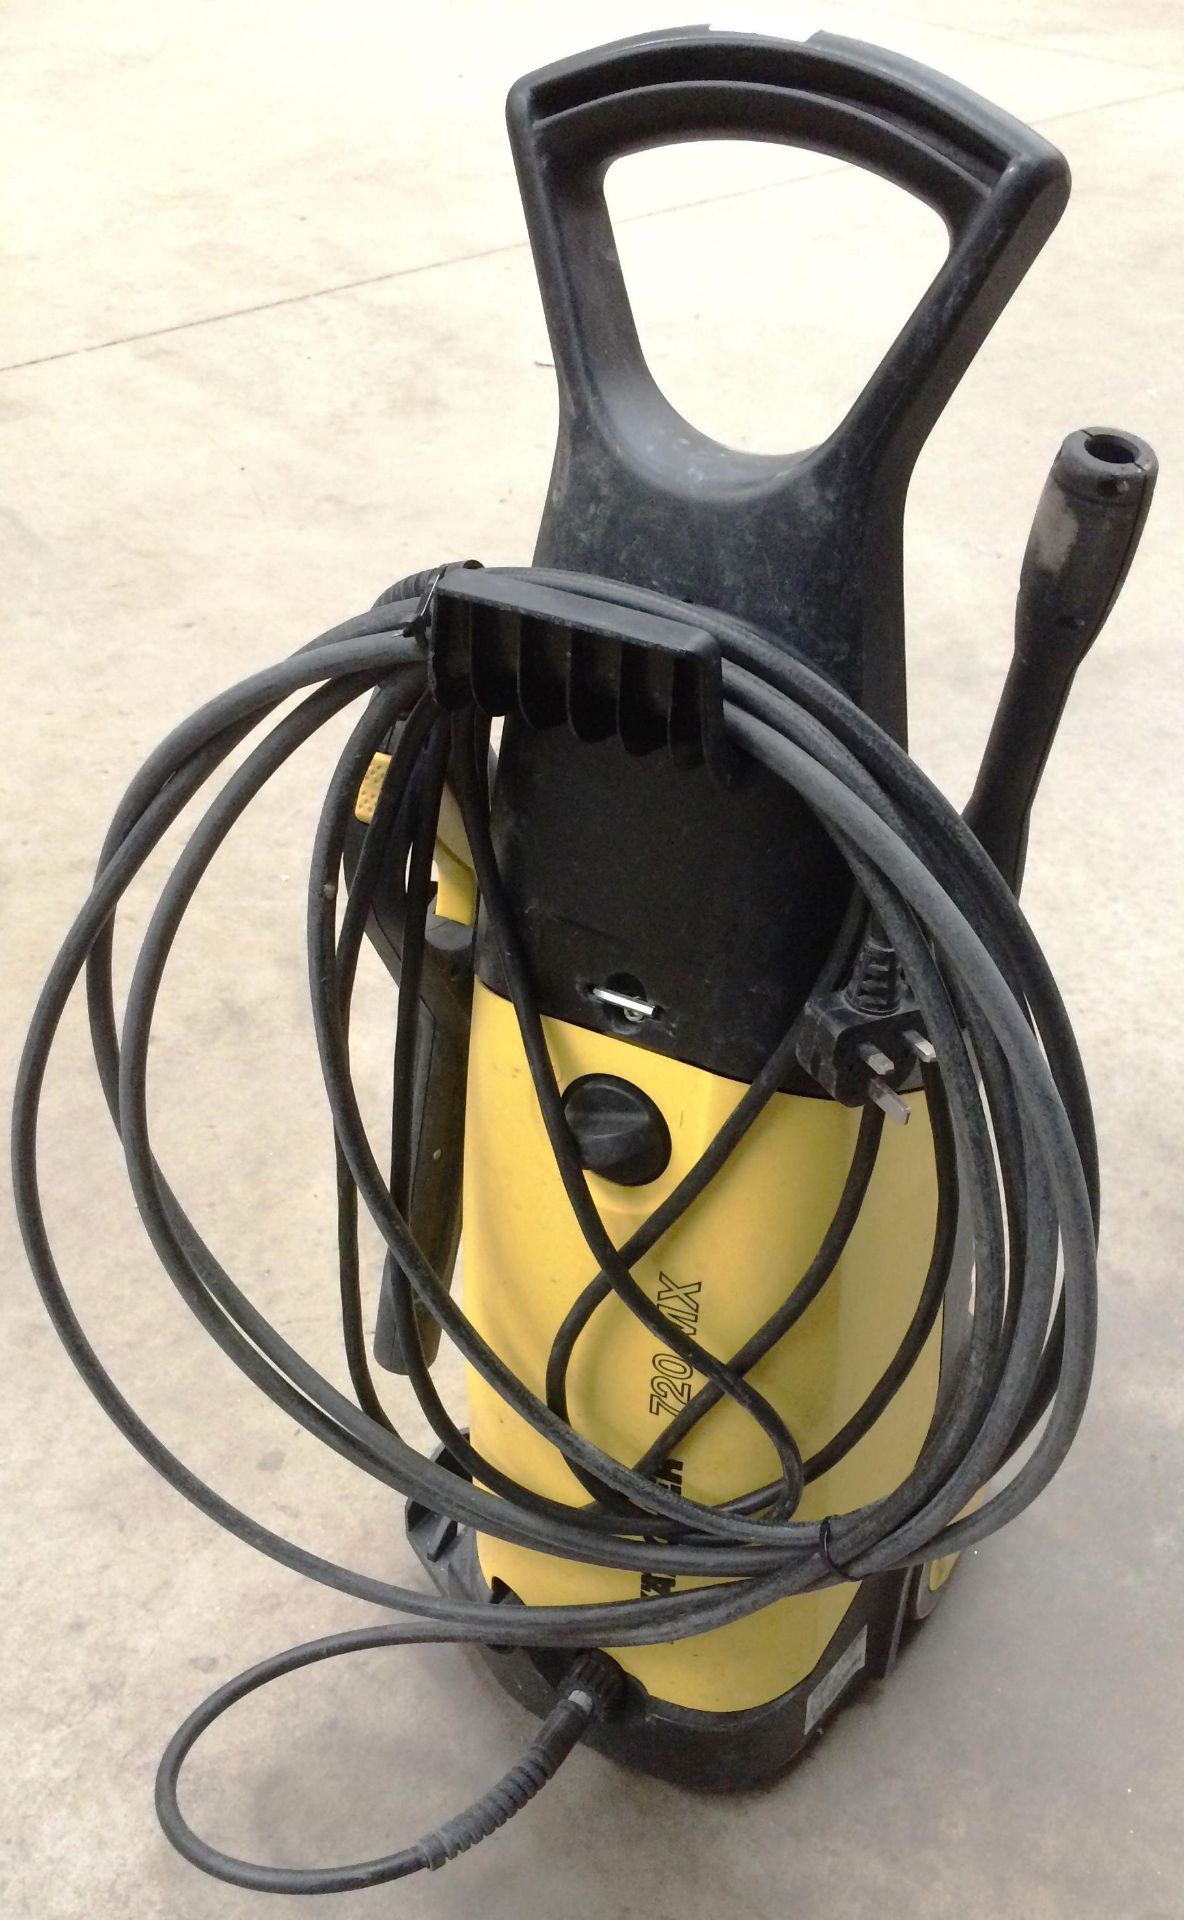 A K'Archer 720 MX 240v mobile pressure washer advised motor jammed - sold as seen complete with